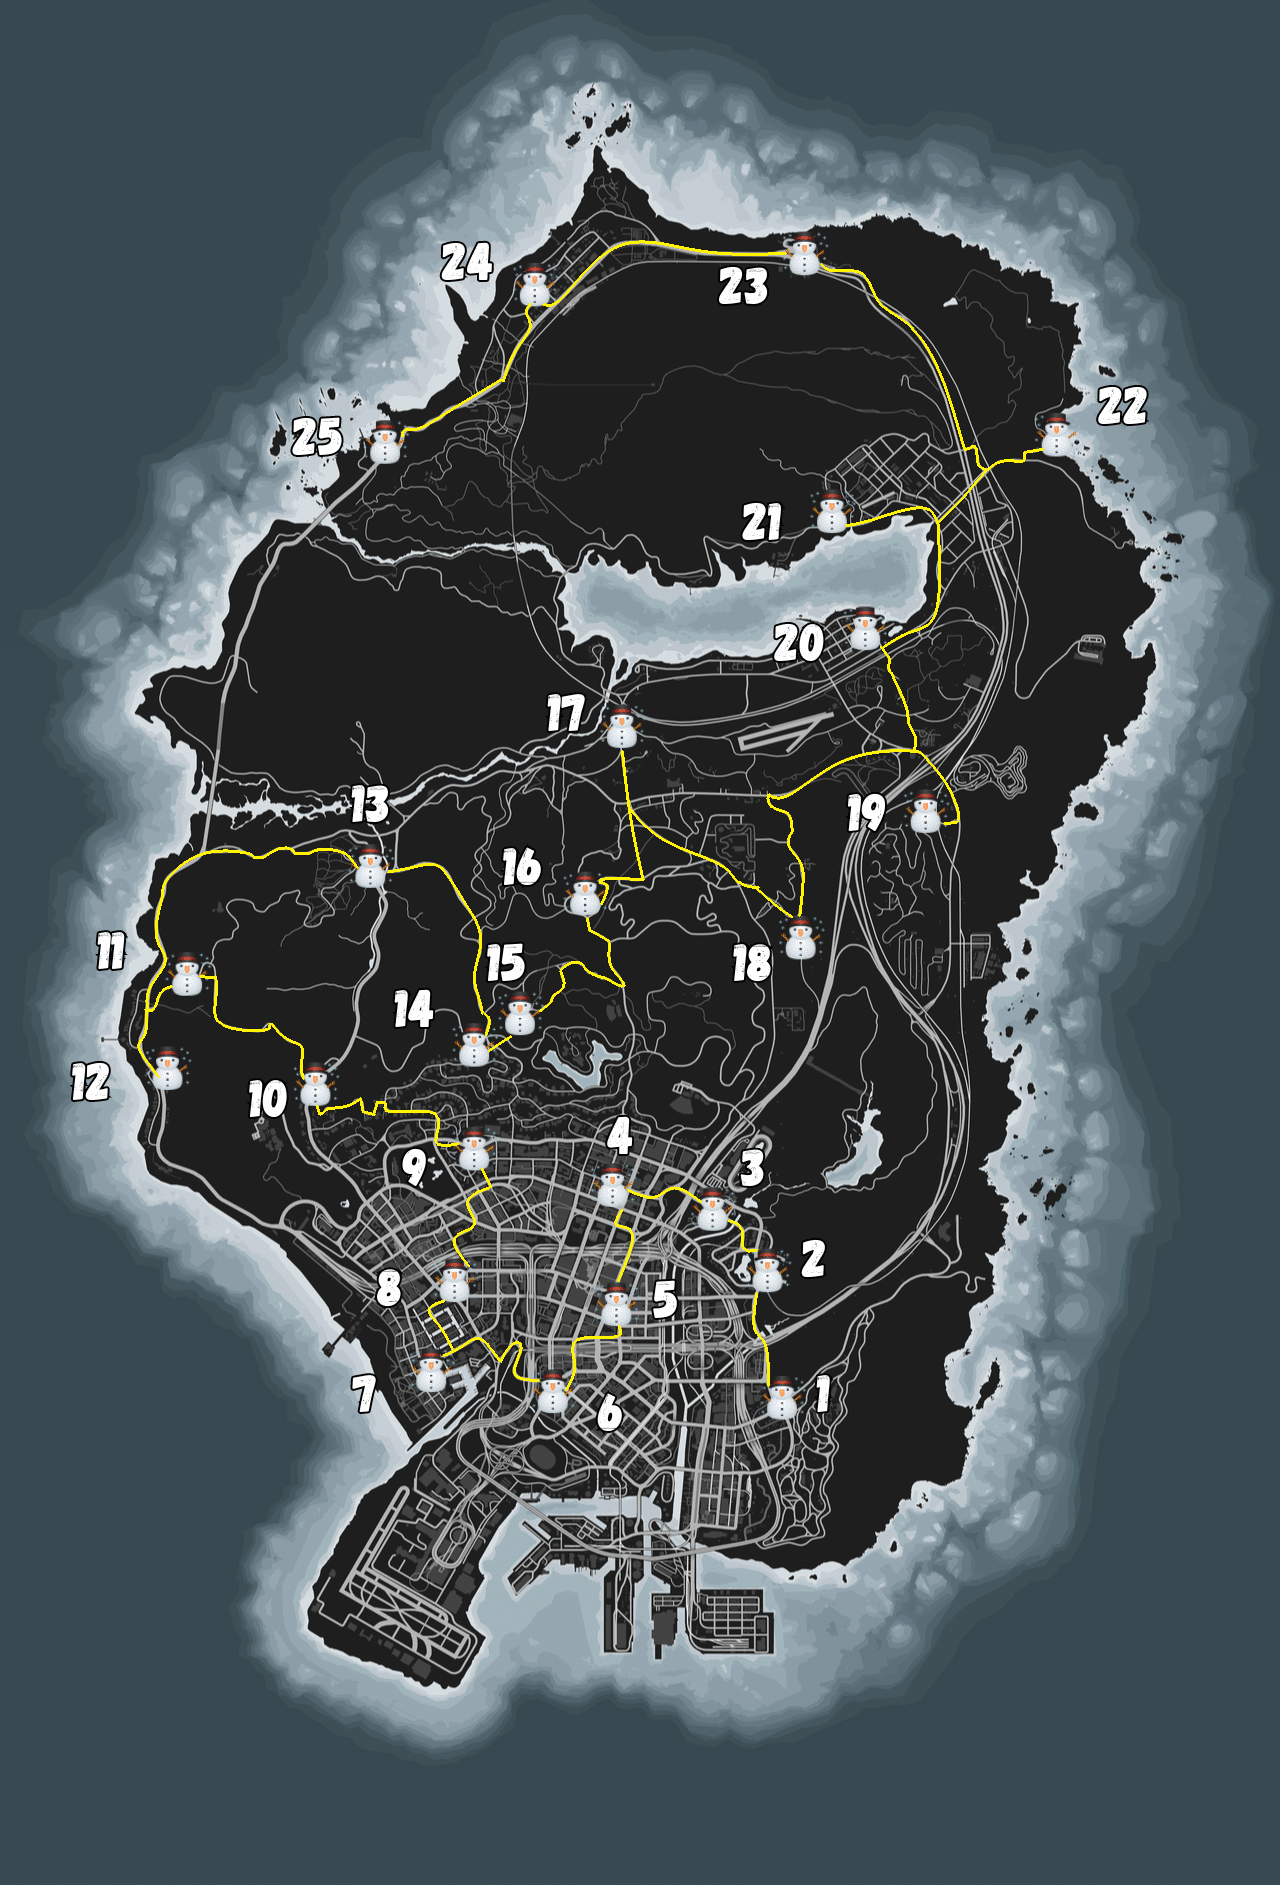 The full map in GTA Online consisting of all Snowmen.